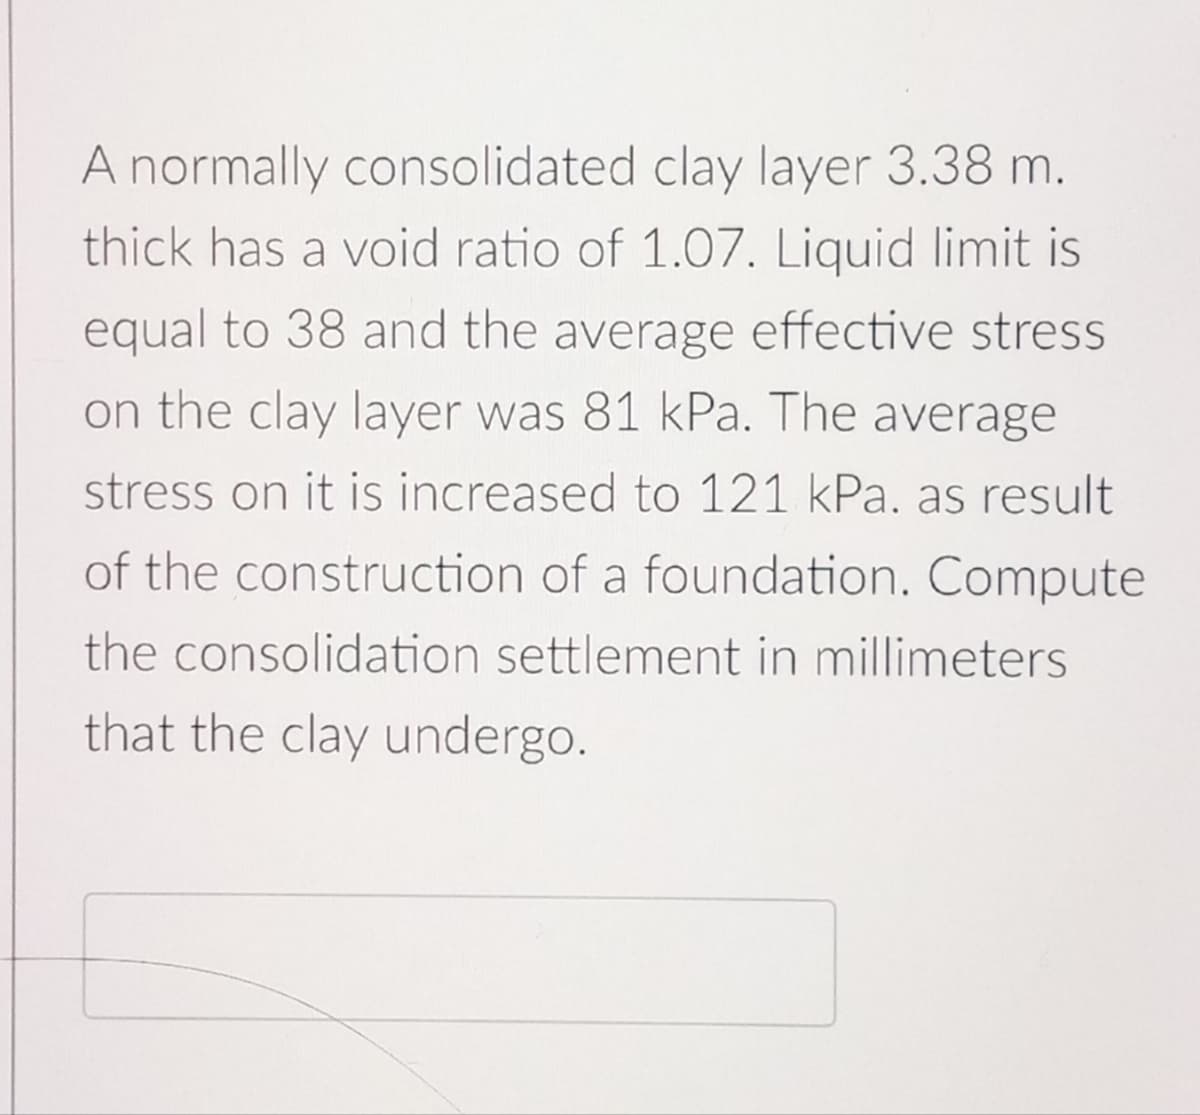 A normally consolidated clay layer 3.38 m.
thick has a void ratio of 1.07. Liquid limit is
equal to 38 and the average effective stress
on the clay layer was 81 kPa. The average
stress on it is increased to 121 kPa. as result
of the construction of a foundation. Compute
the consolidation settlement in millimeters
that the clay undergo.